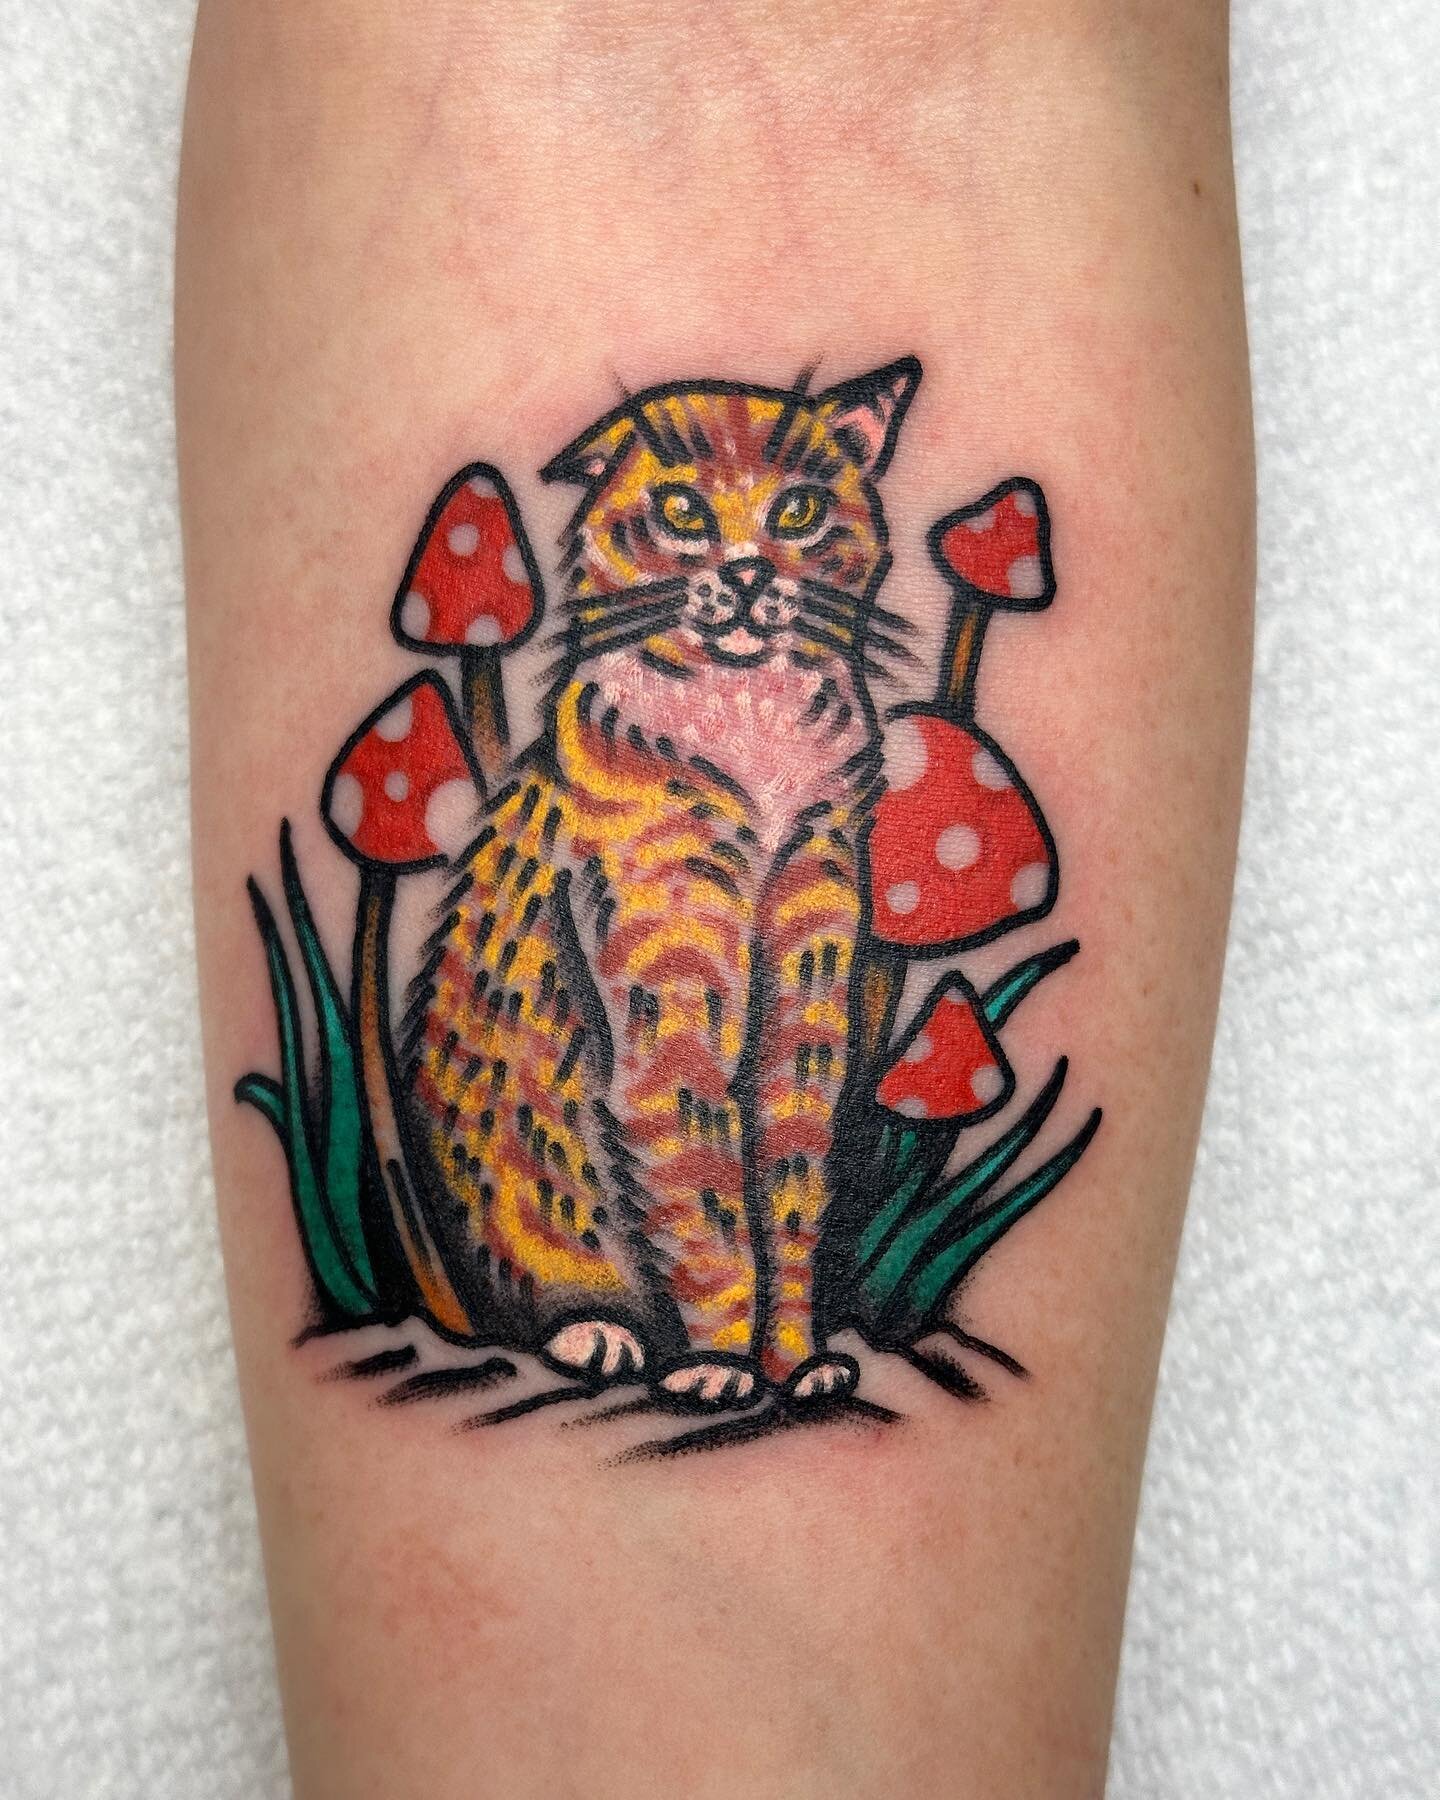 My cousin @myerger90 came to Ann Arbor today and we made this portrait for cat toad 🍄 @namebrandtattoo